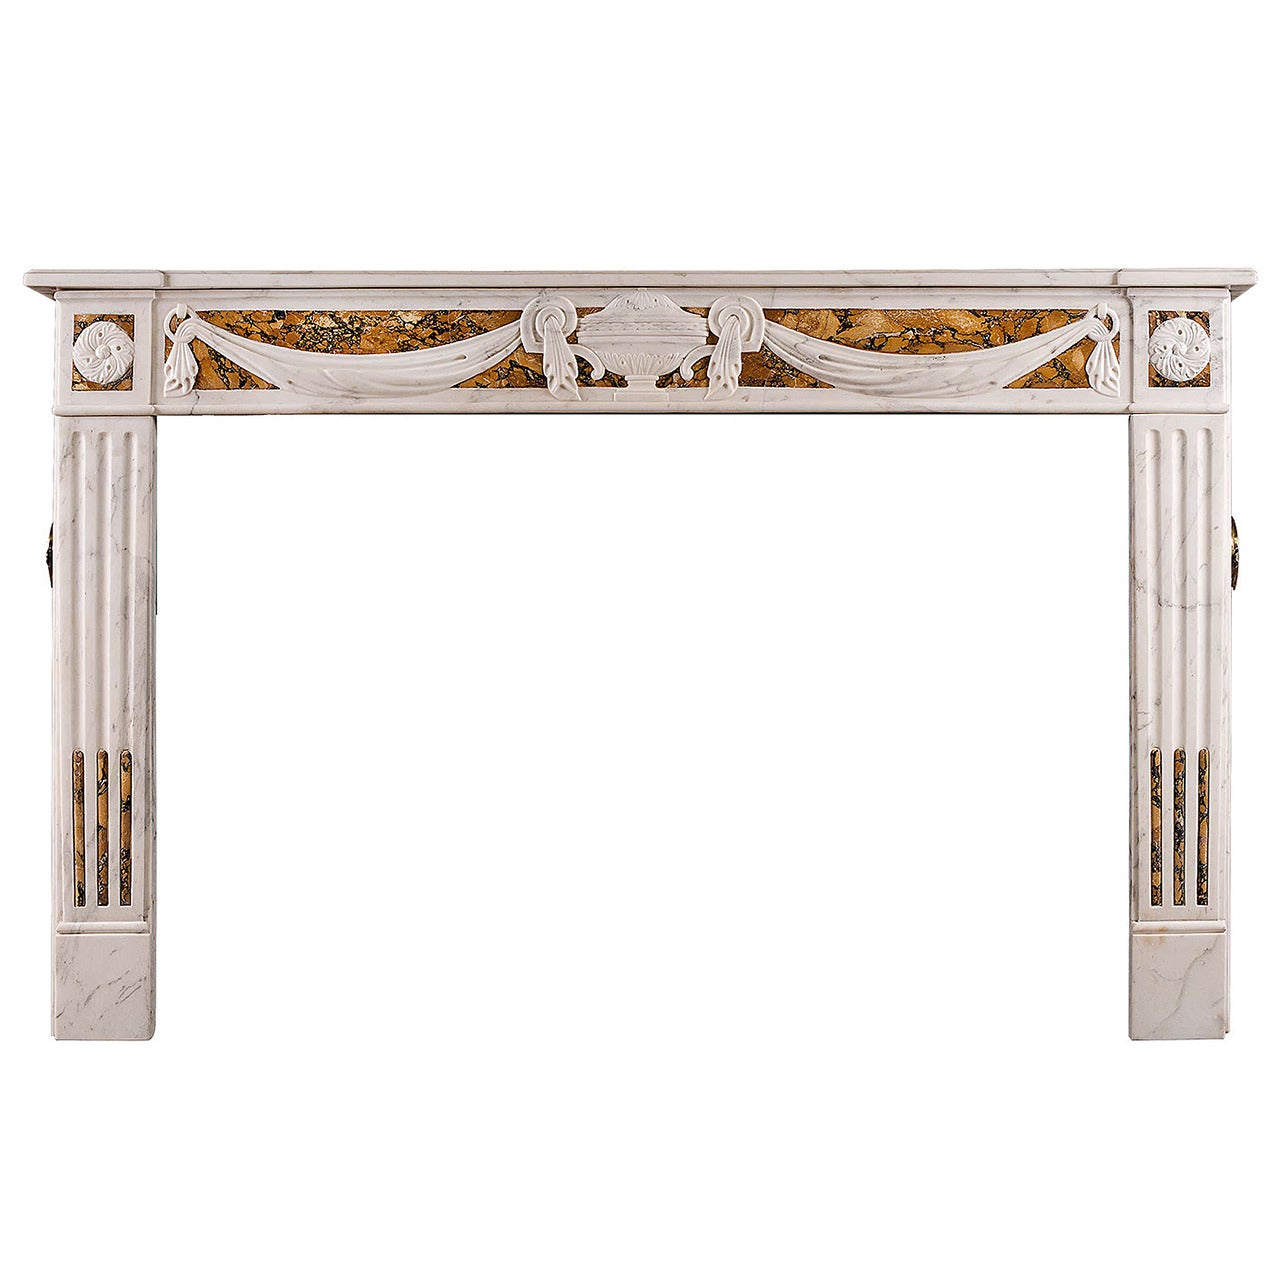 French Louis XVI Style Fireplace in Statuary and Sienna Marble